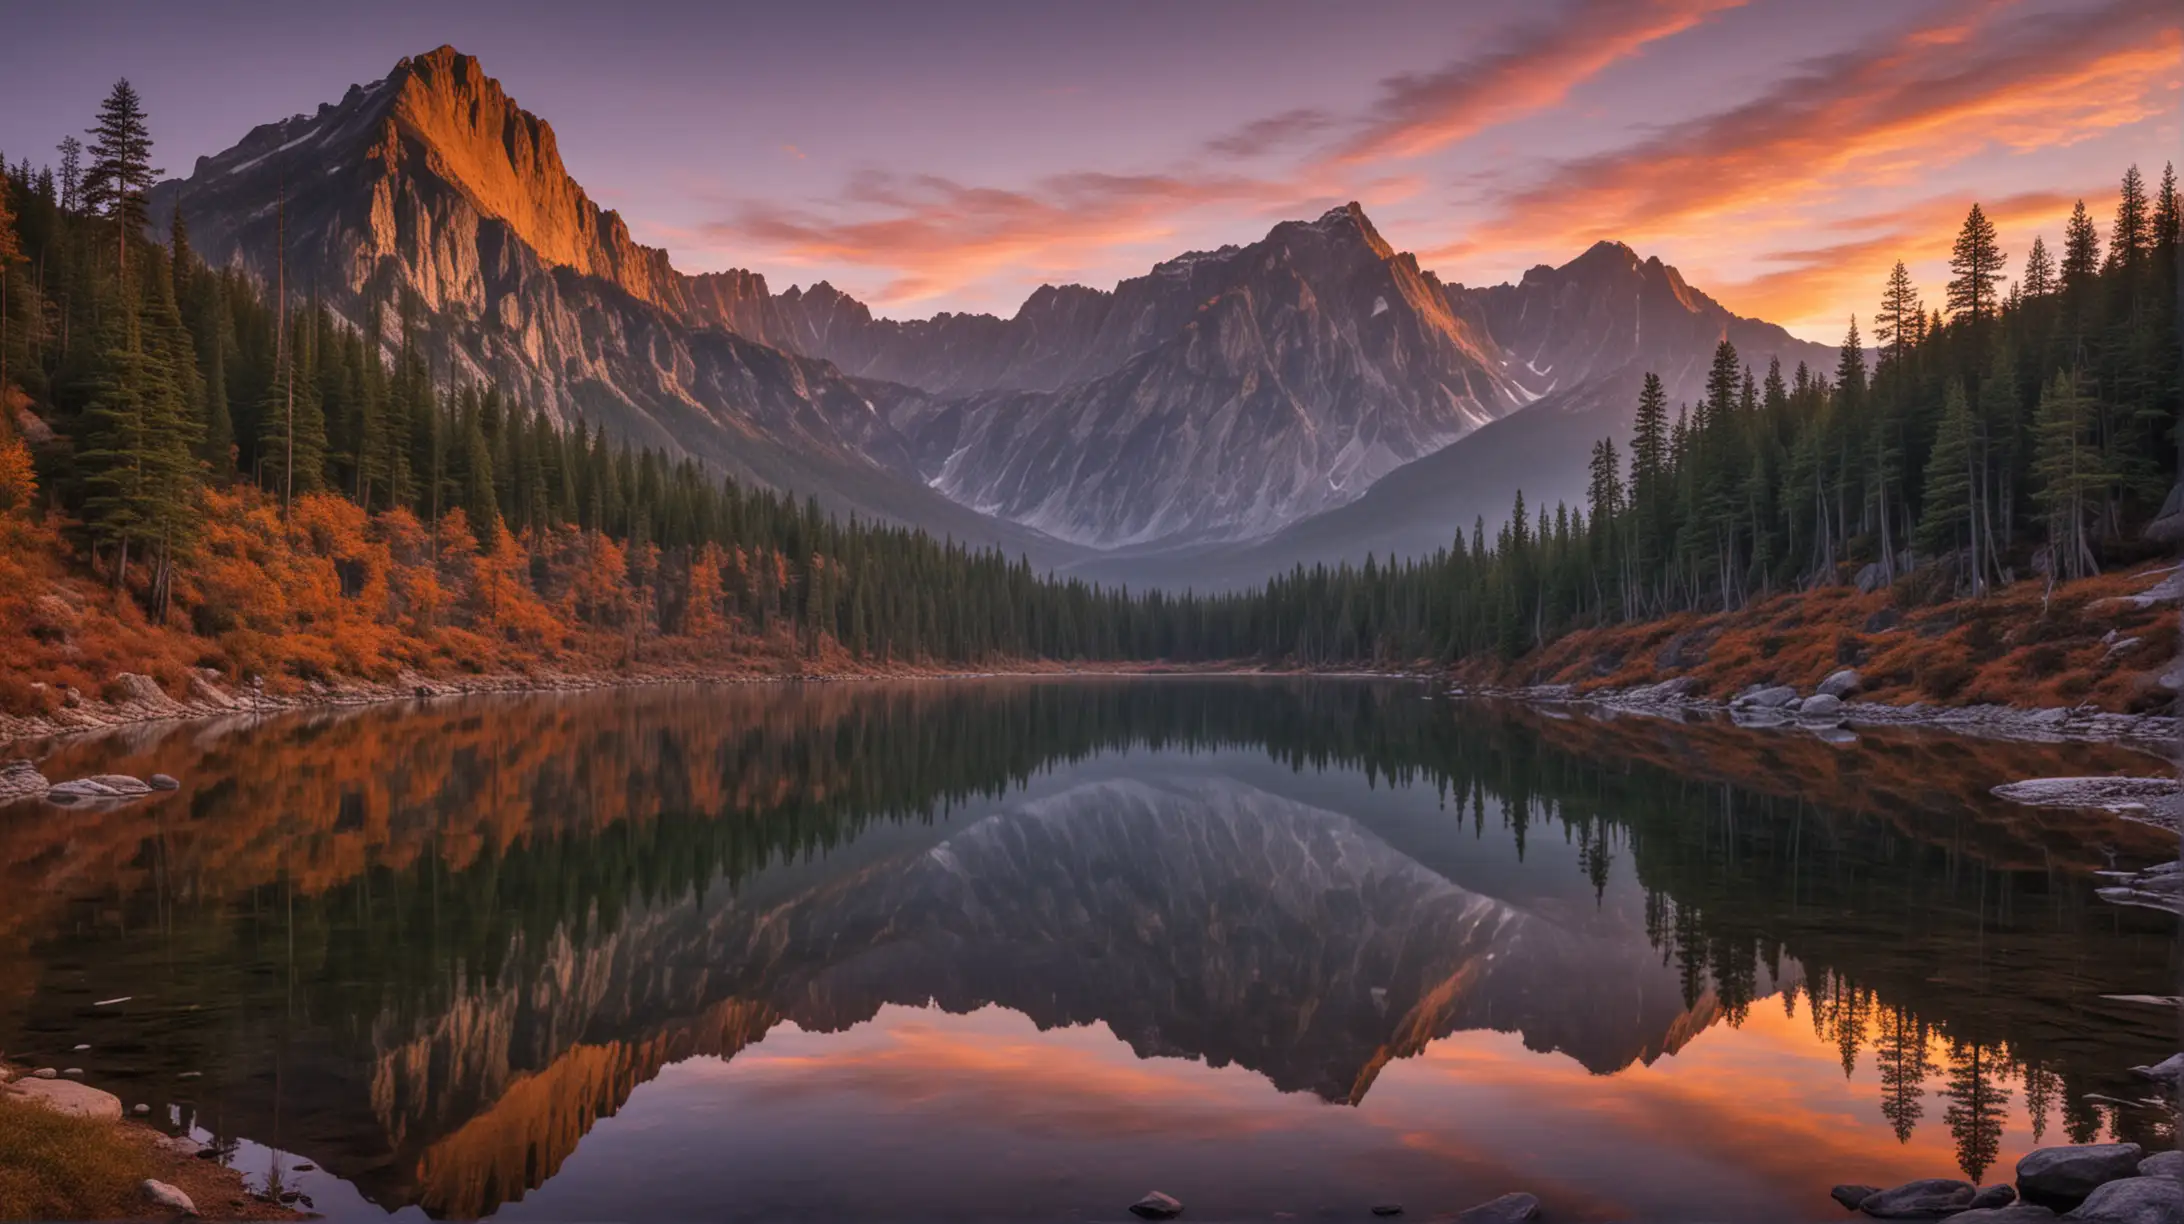 a panoramic view of a vast mountain range at sunrise, where the sky is painted with hues of deep orange, purple, and gold. The foreground shows a serene lake reflecting the majestic peaks, surrounded by lush green pine forests. In the center of this scene, there's a solitary figure standing on a rocky outcrop, silhouetted against the colorful sky, capturing the breathtaking moment with a camera. The atmosphere is filled with a sense of awe, adventure, and the promise of epic experiences waiting to be explored.